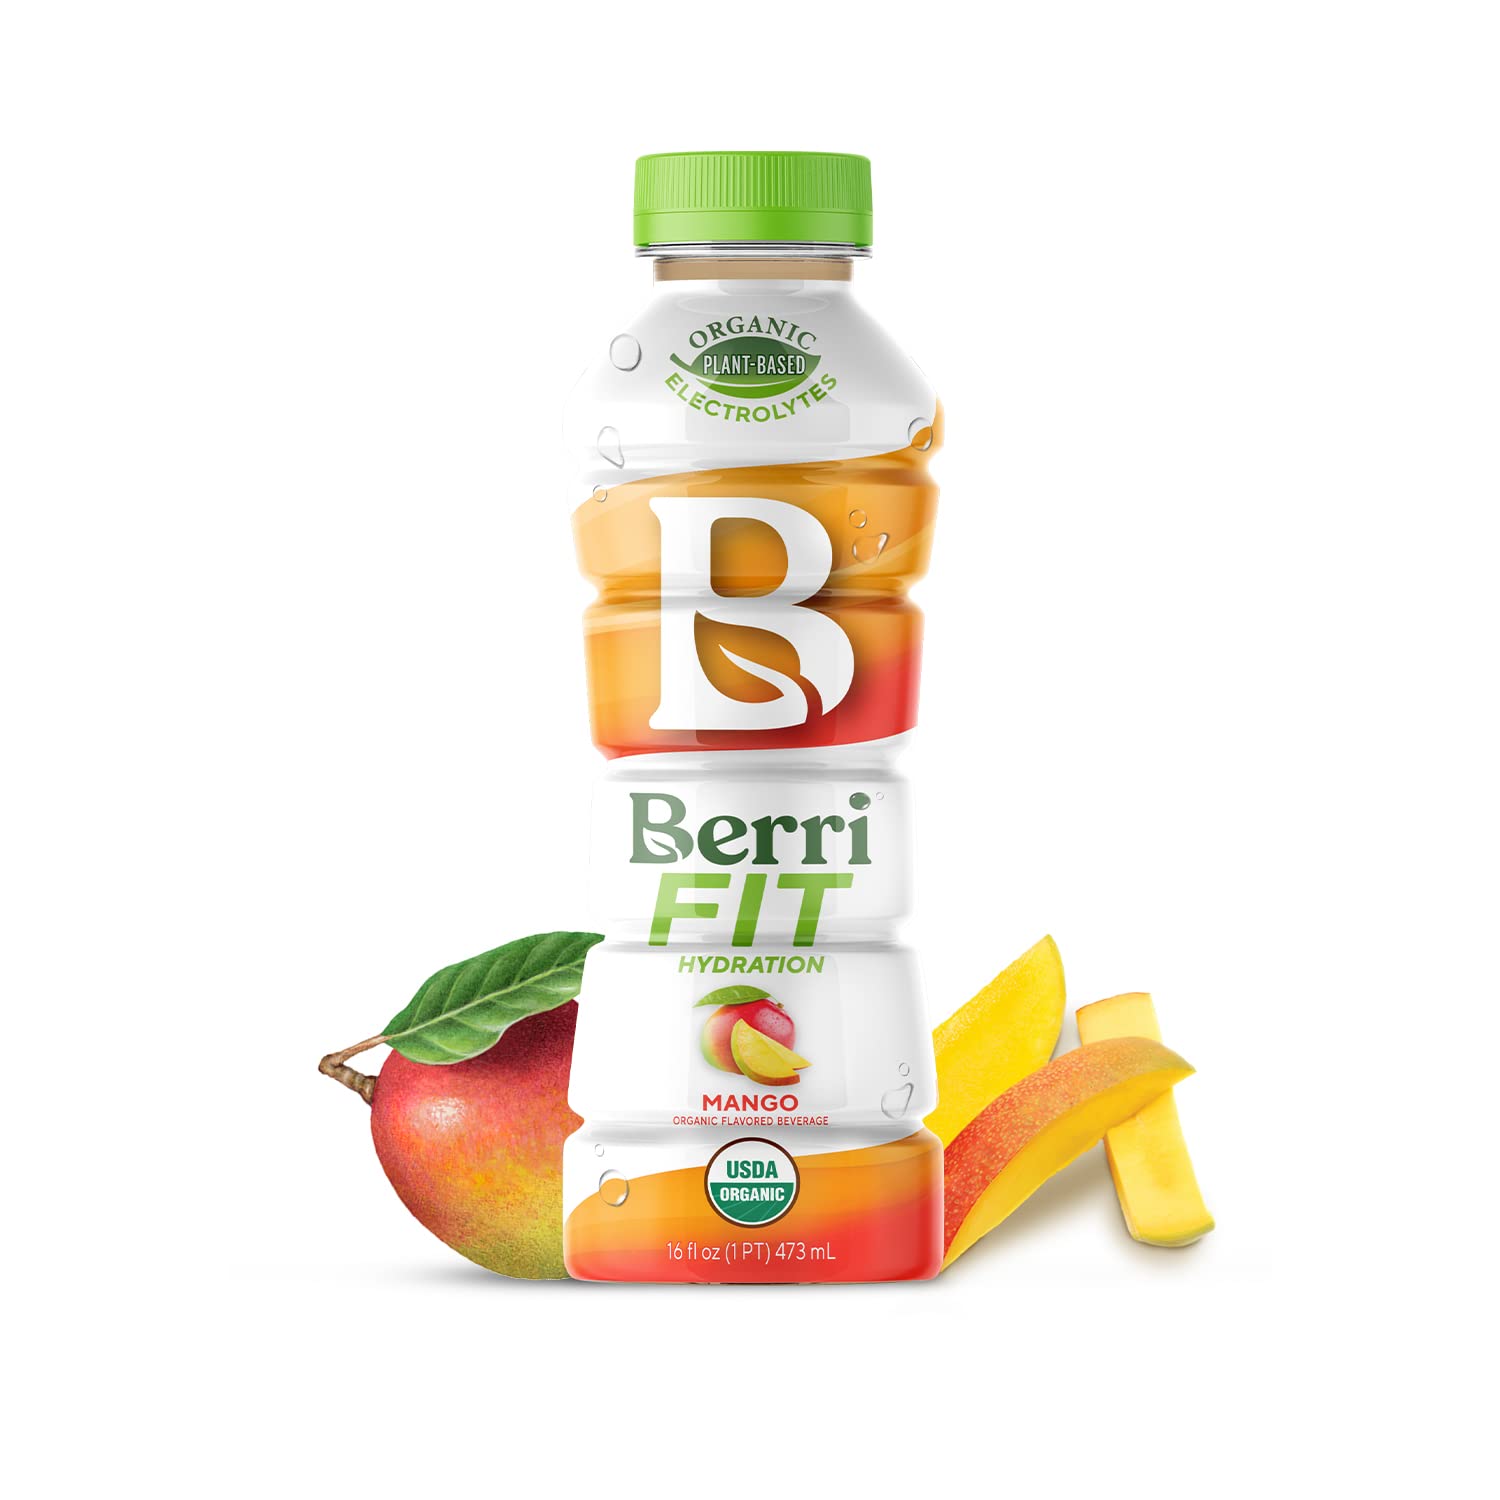 Berri Fit Hydration - Organic Mango Flavor Natural Sports Drink - Plant-Based Electrolyte Beverage – Low Calorie, Paleo Coconut Water Solution, 16o...